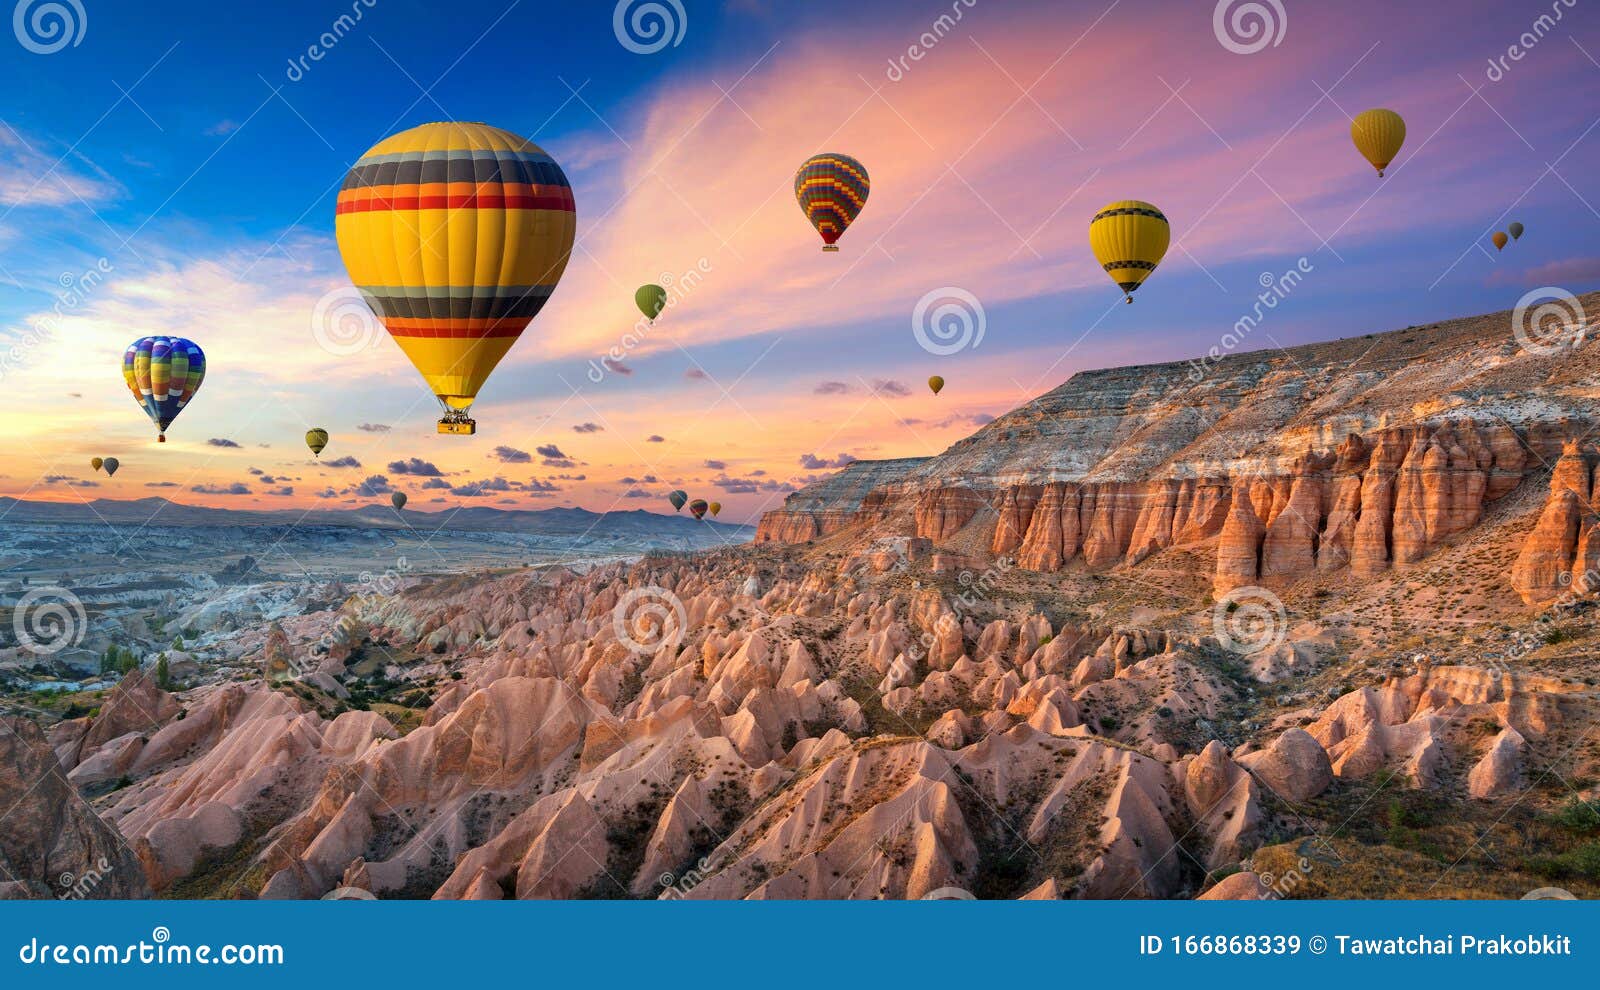 hot air balloons and red valley at sunset in goreme, cappadocia in turkey.